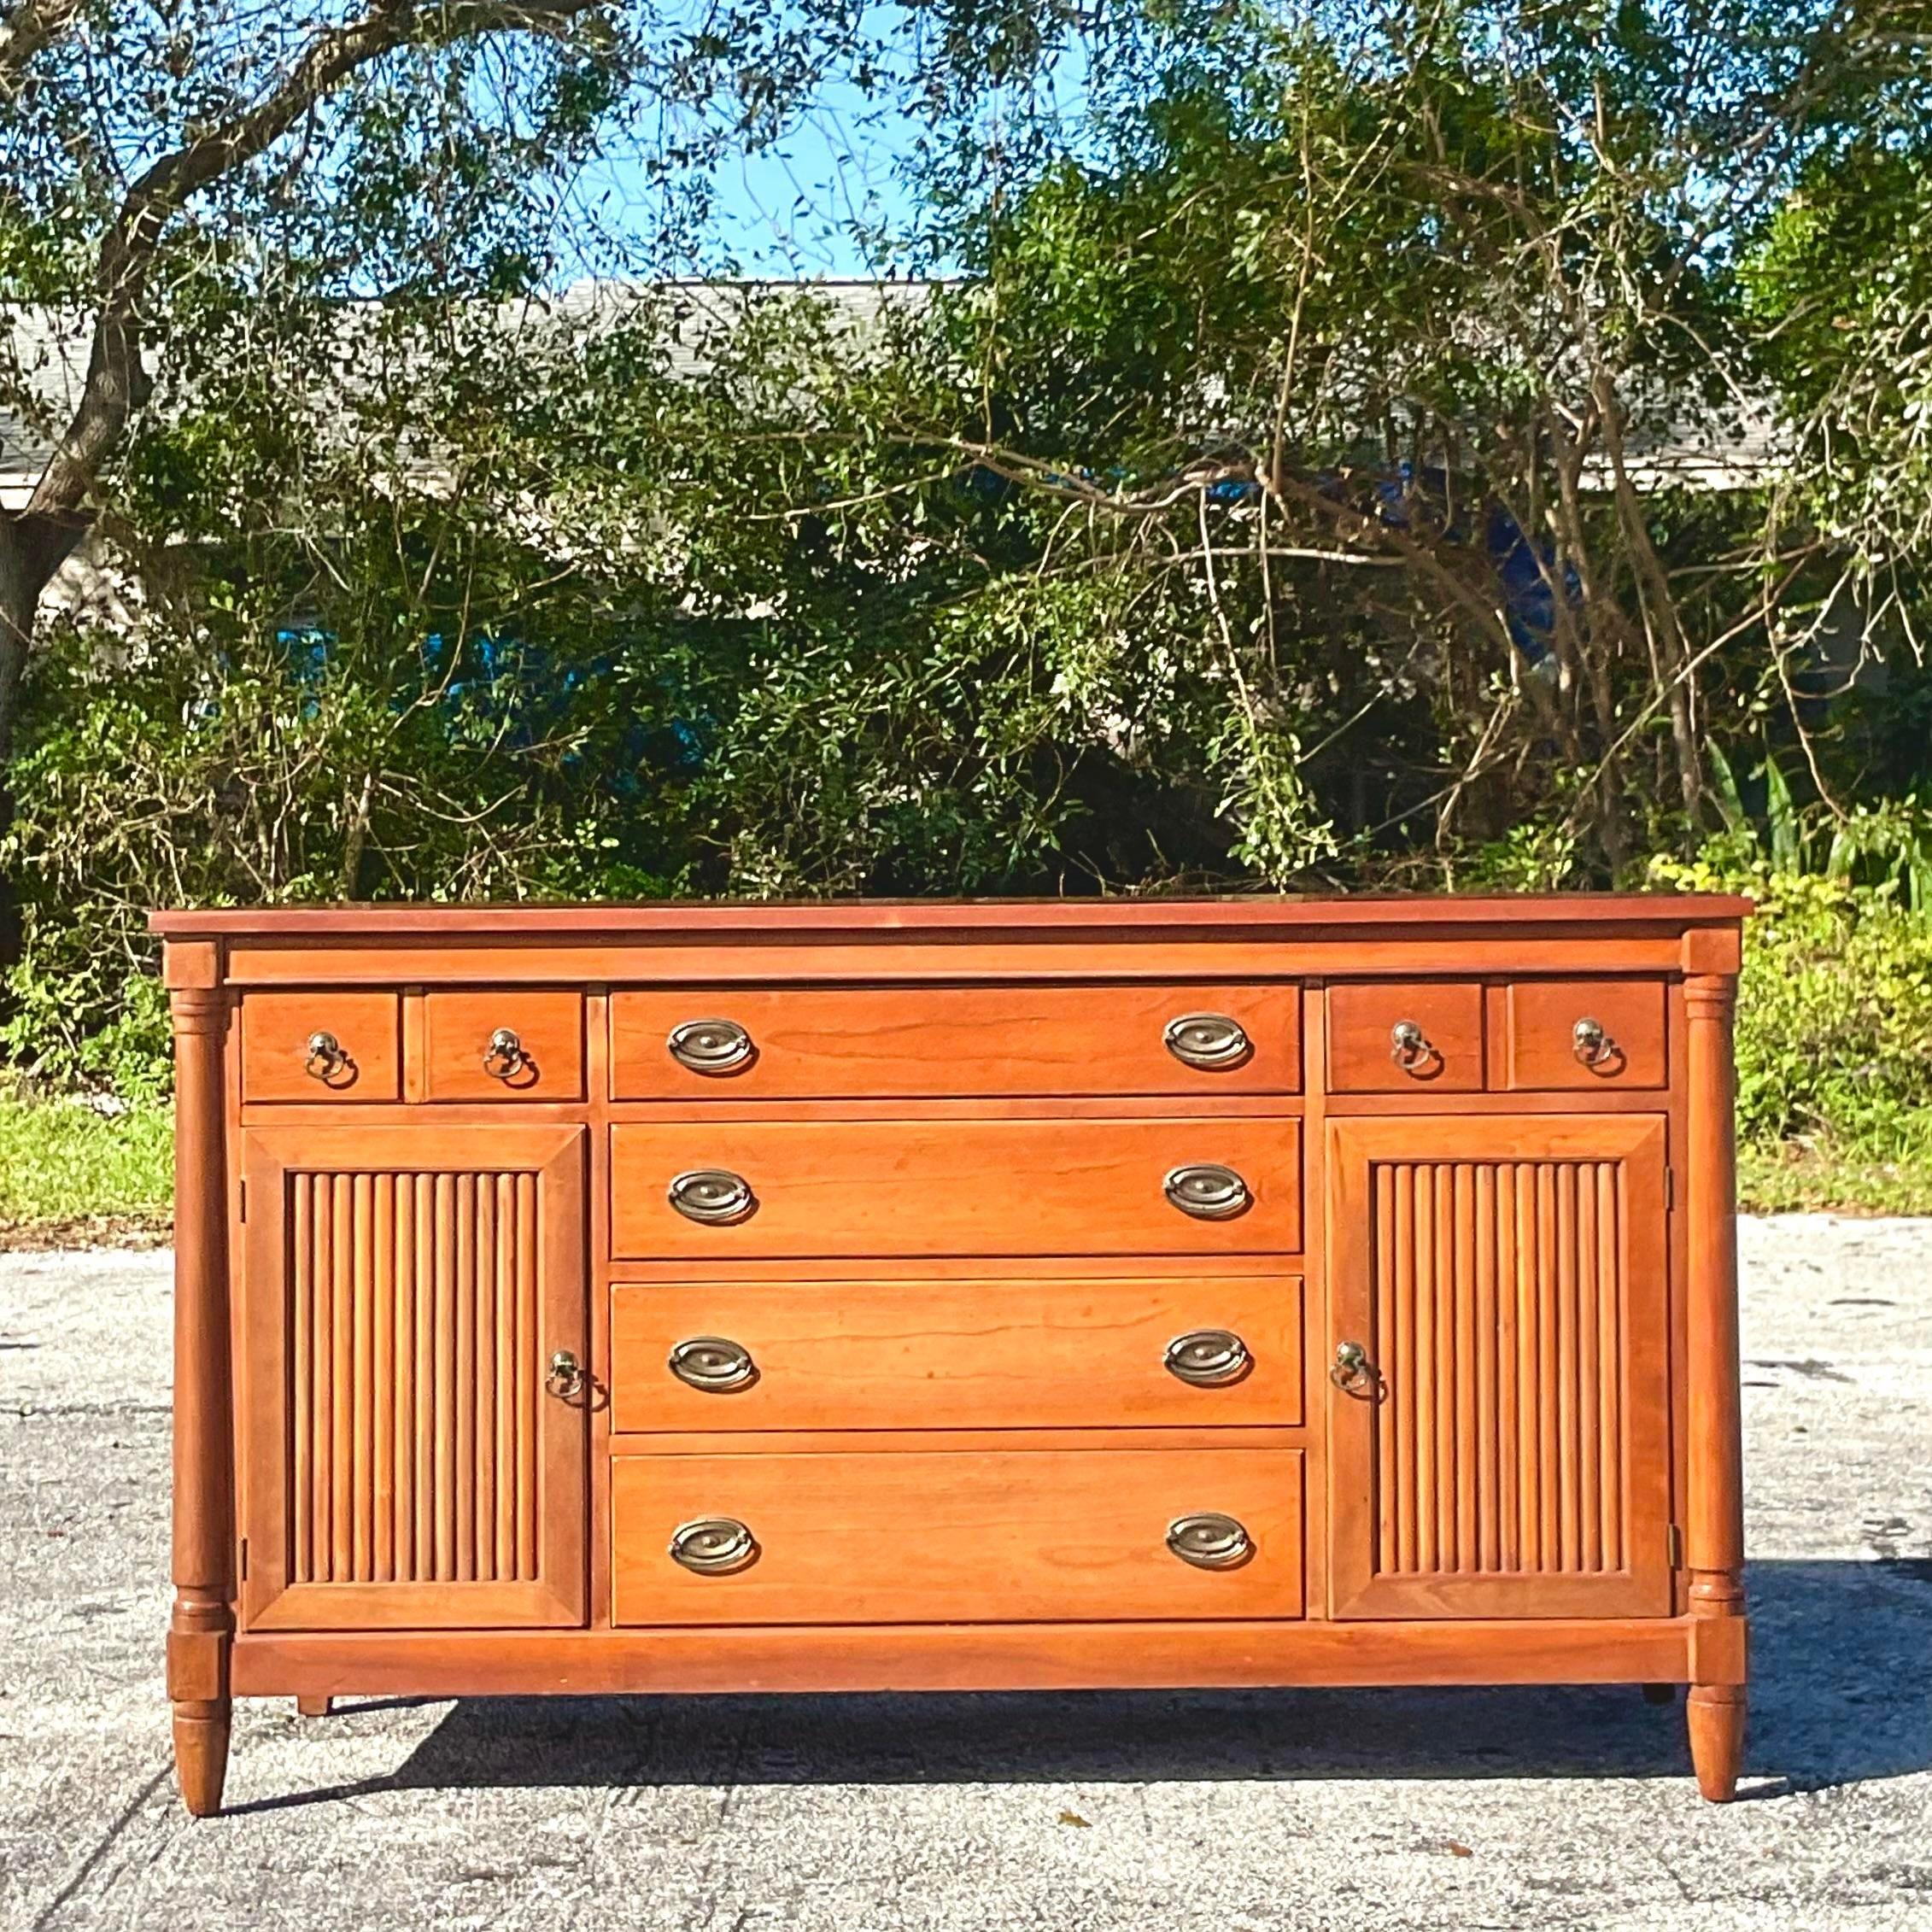 A fabulous vintage Boho credenza. Made by the Morganton group and tagged inside the drawer. A beautiful double door credenza with a beautiful warm wood finish. Lots of great storage below. Acquired from a Palm Beach estate.